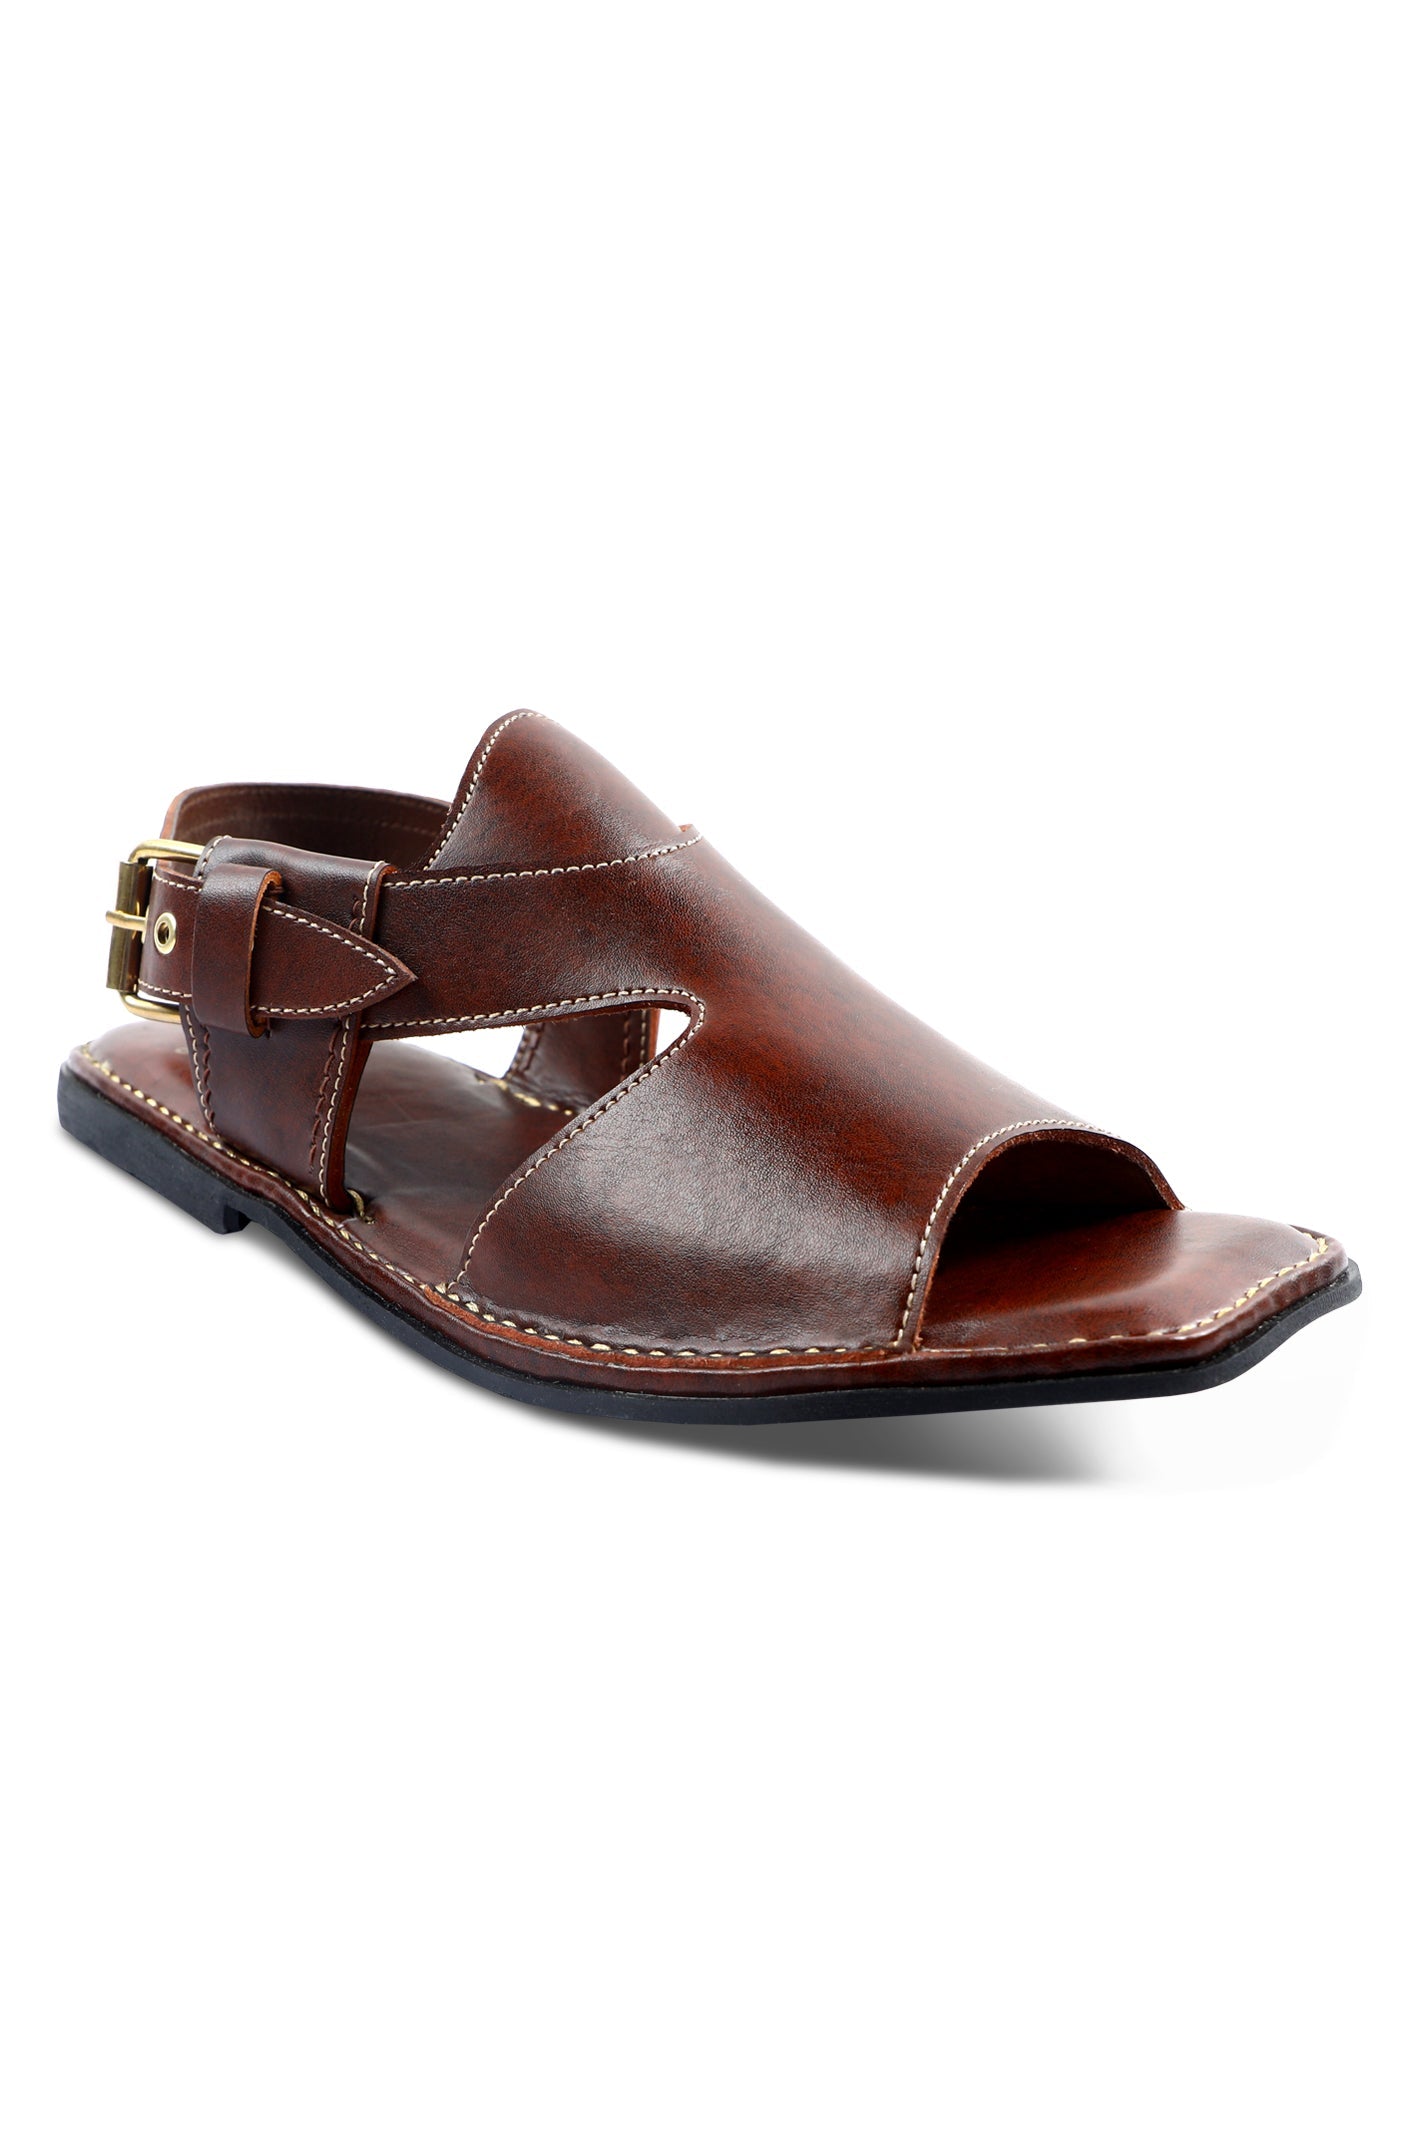 French Emporio Men Sandals SKU: PSLD-0030-BROWN - Diners